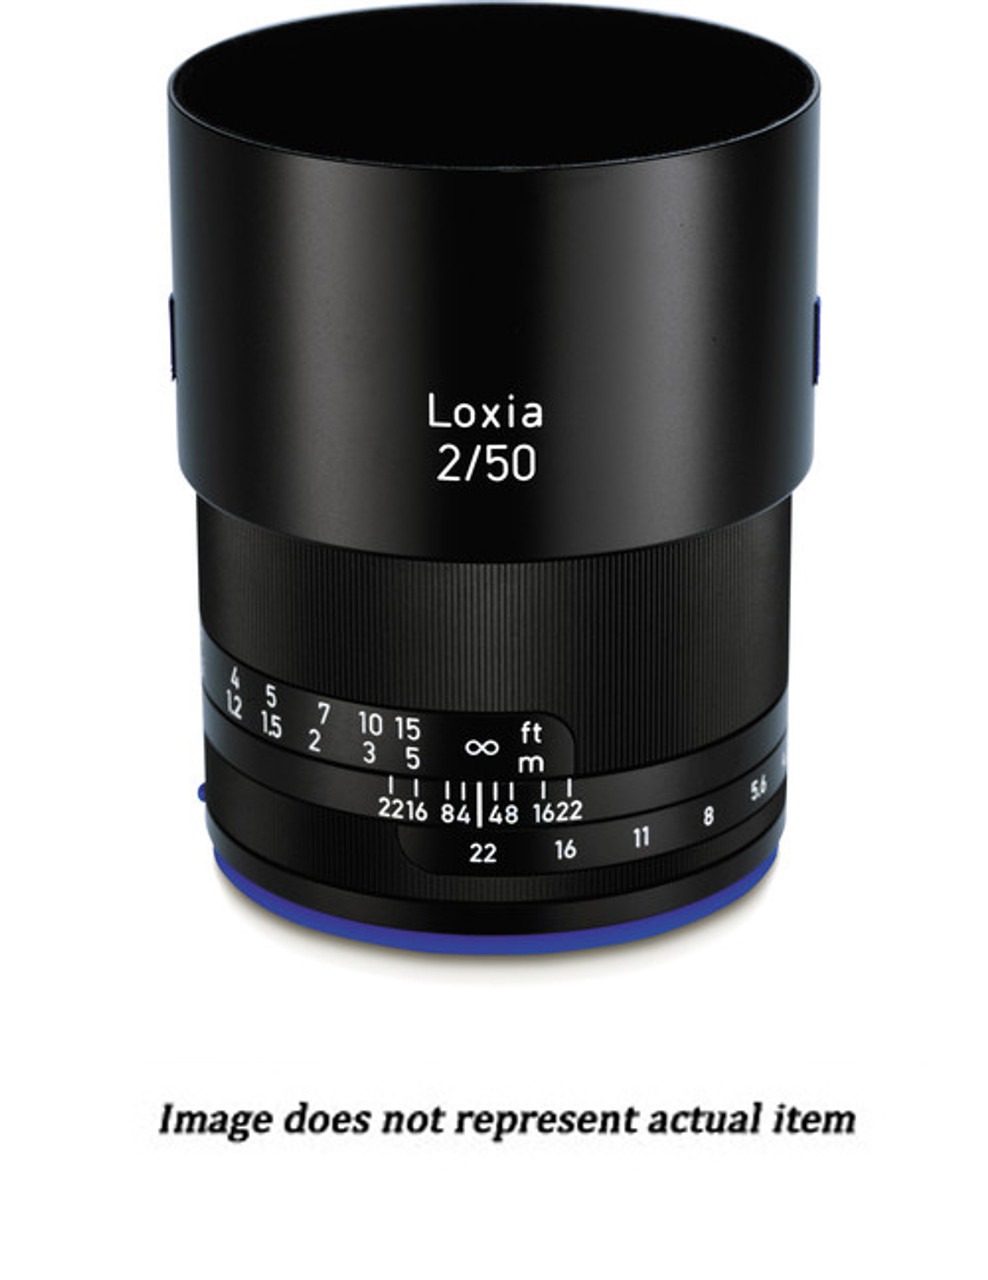 Zeiss Loxia 50mm f/2 Planar T* Lens for Sony E Mount (USED) - S/N 51568135